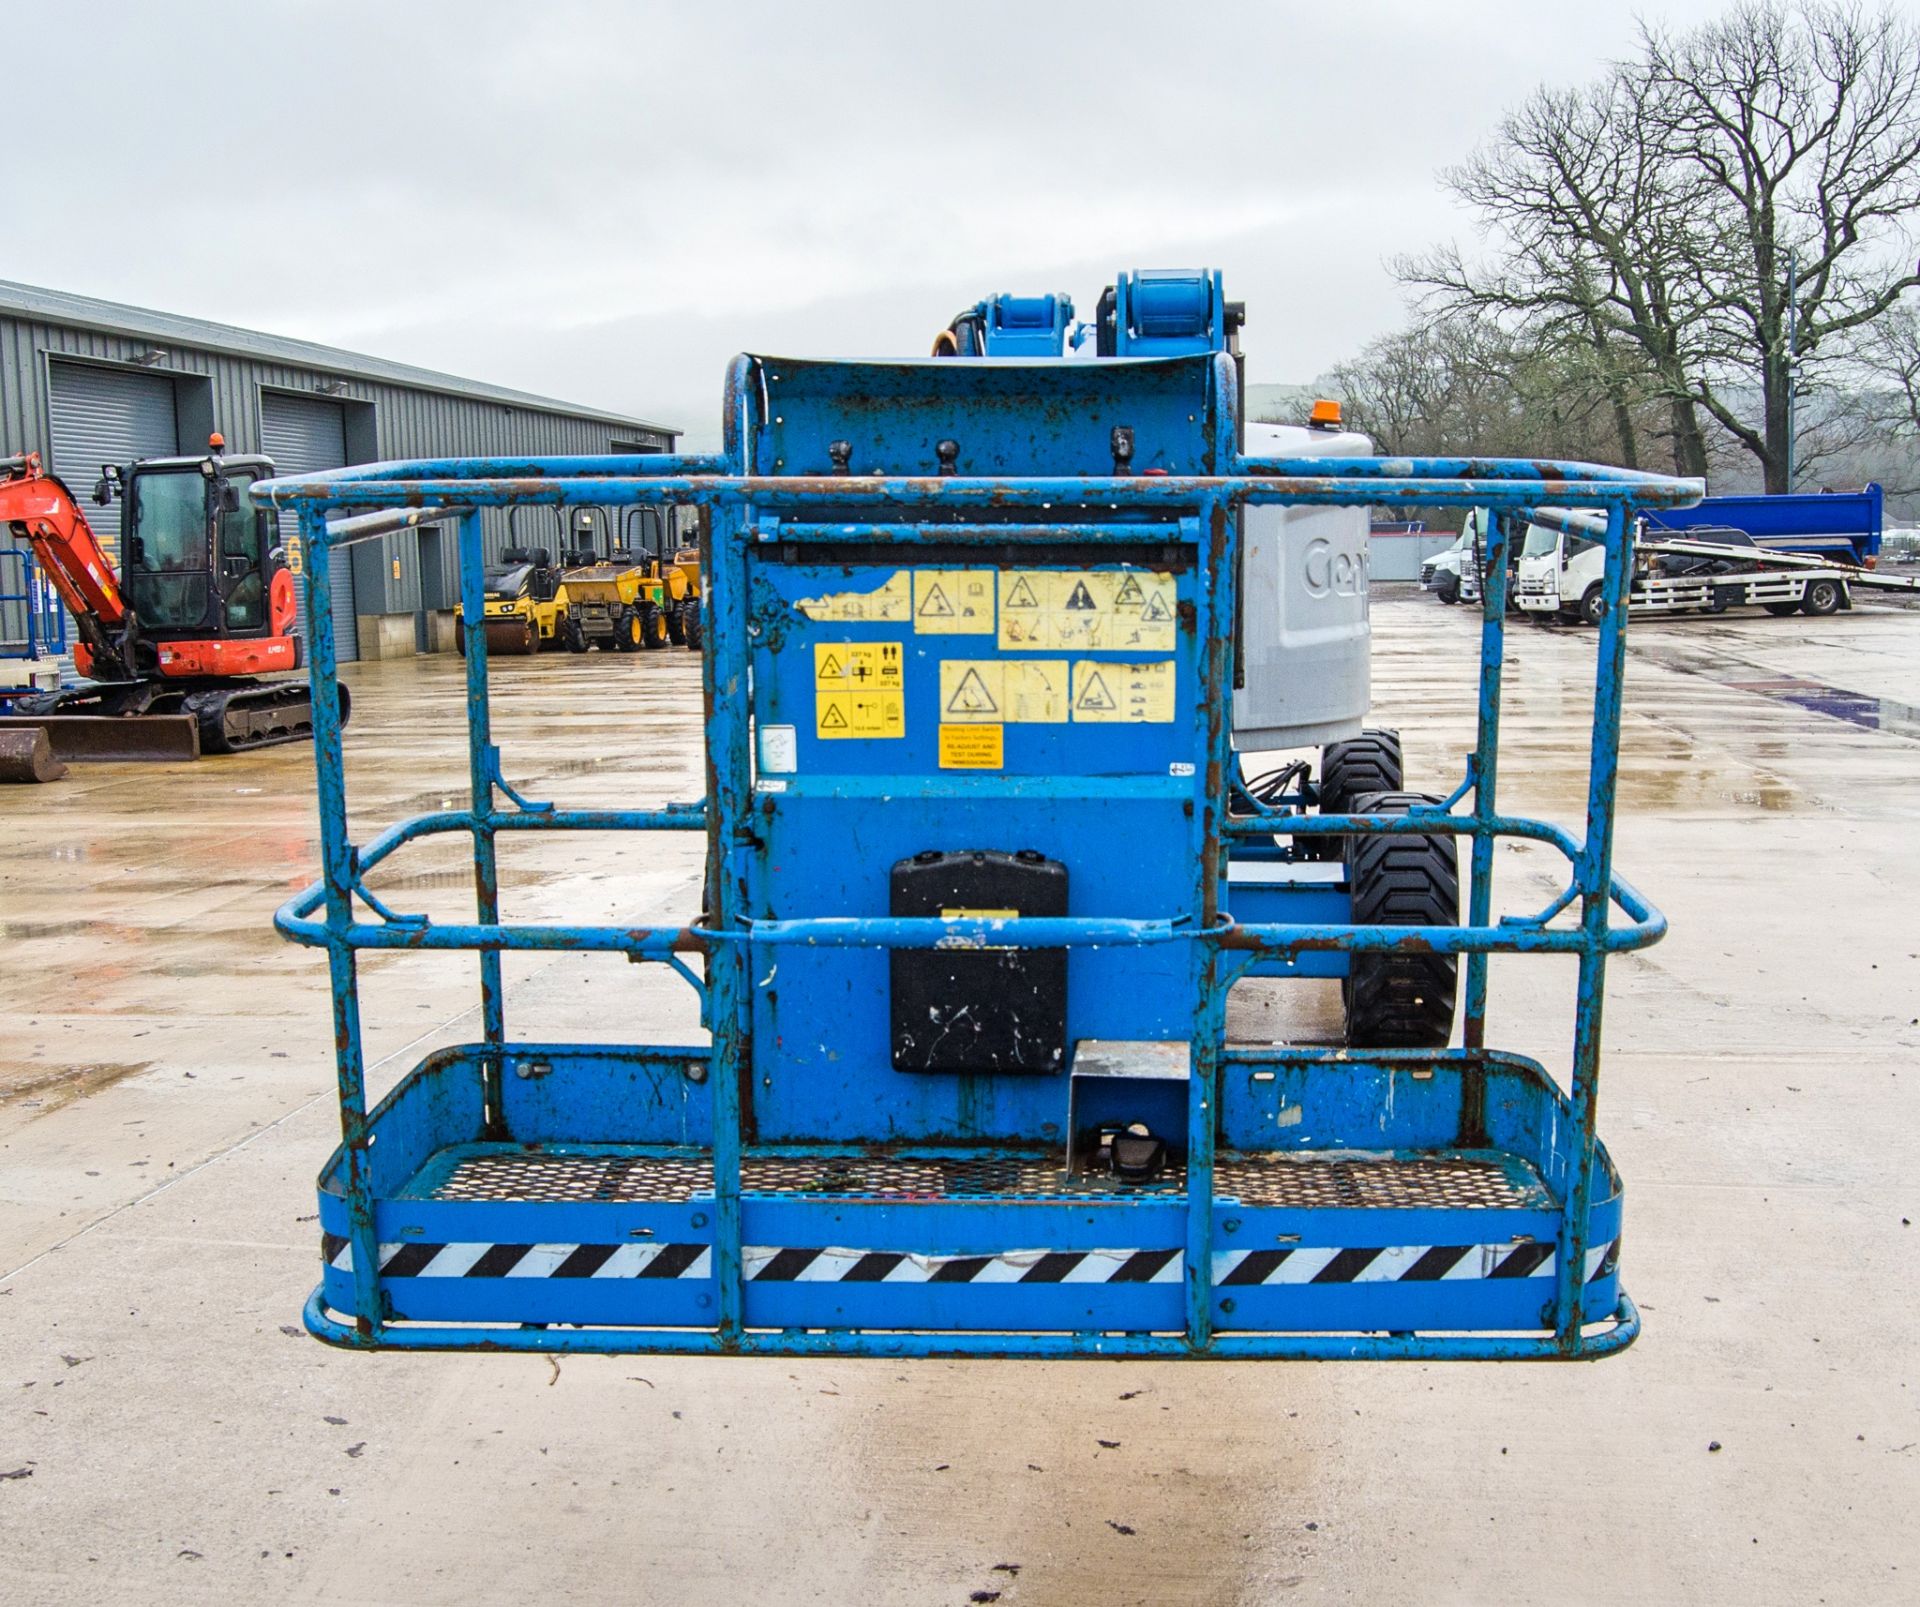 Genie Z45/25J diesel/battery electric 4 wheel drive articulated boom lift access platform Year: 2014 - Image 5 of 19